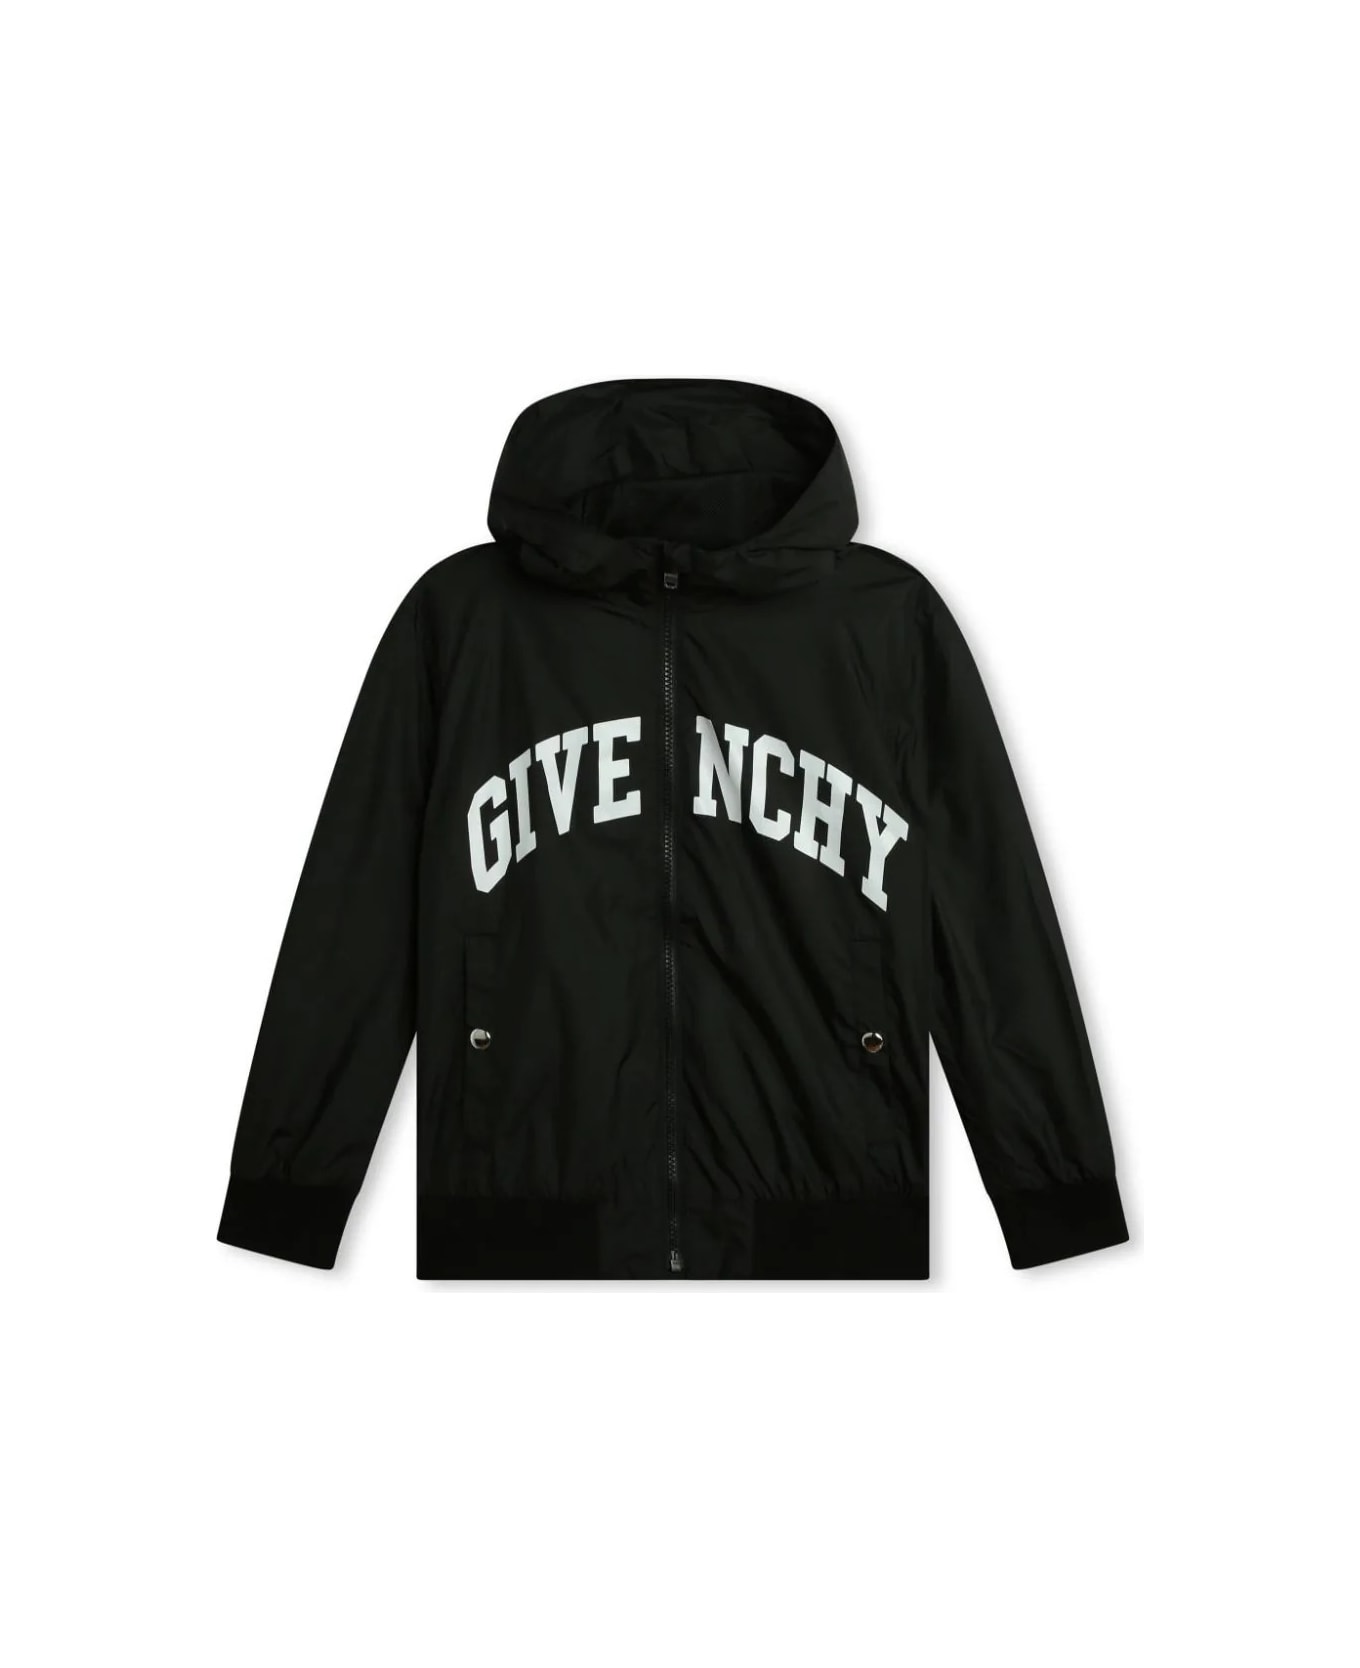 Givenchy Black Givenchy Windbreaker With Zip And Hood - Black